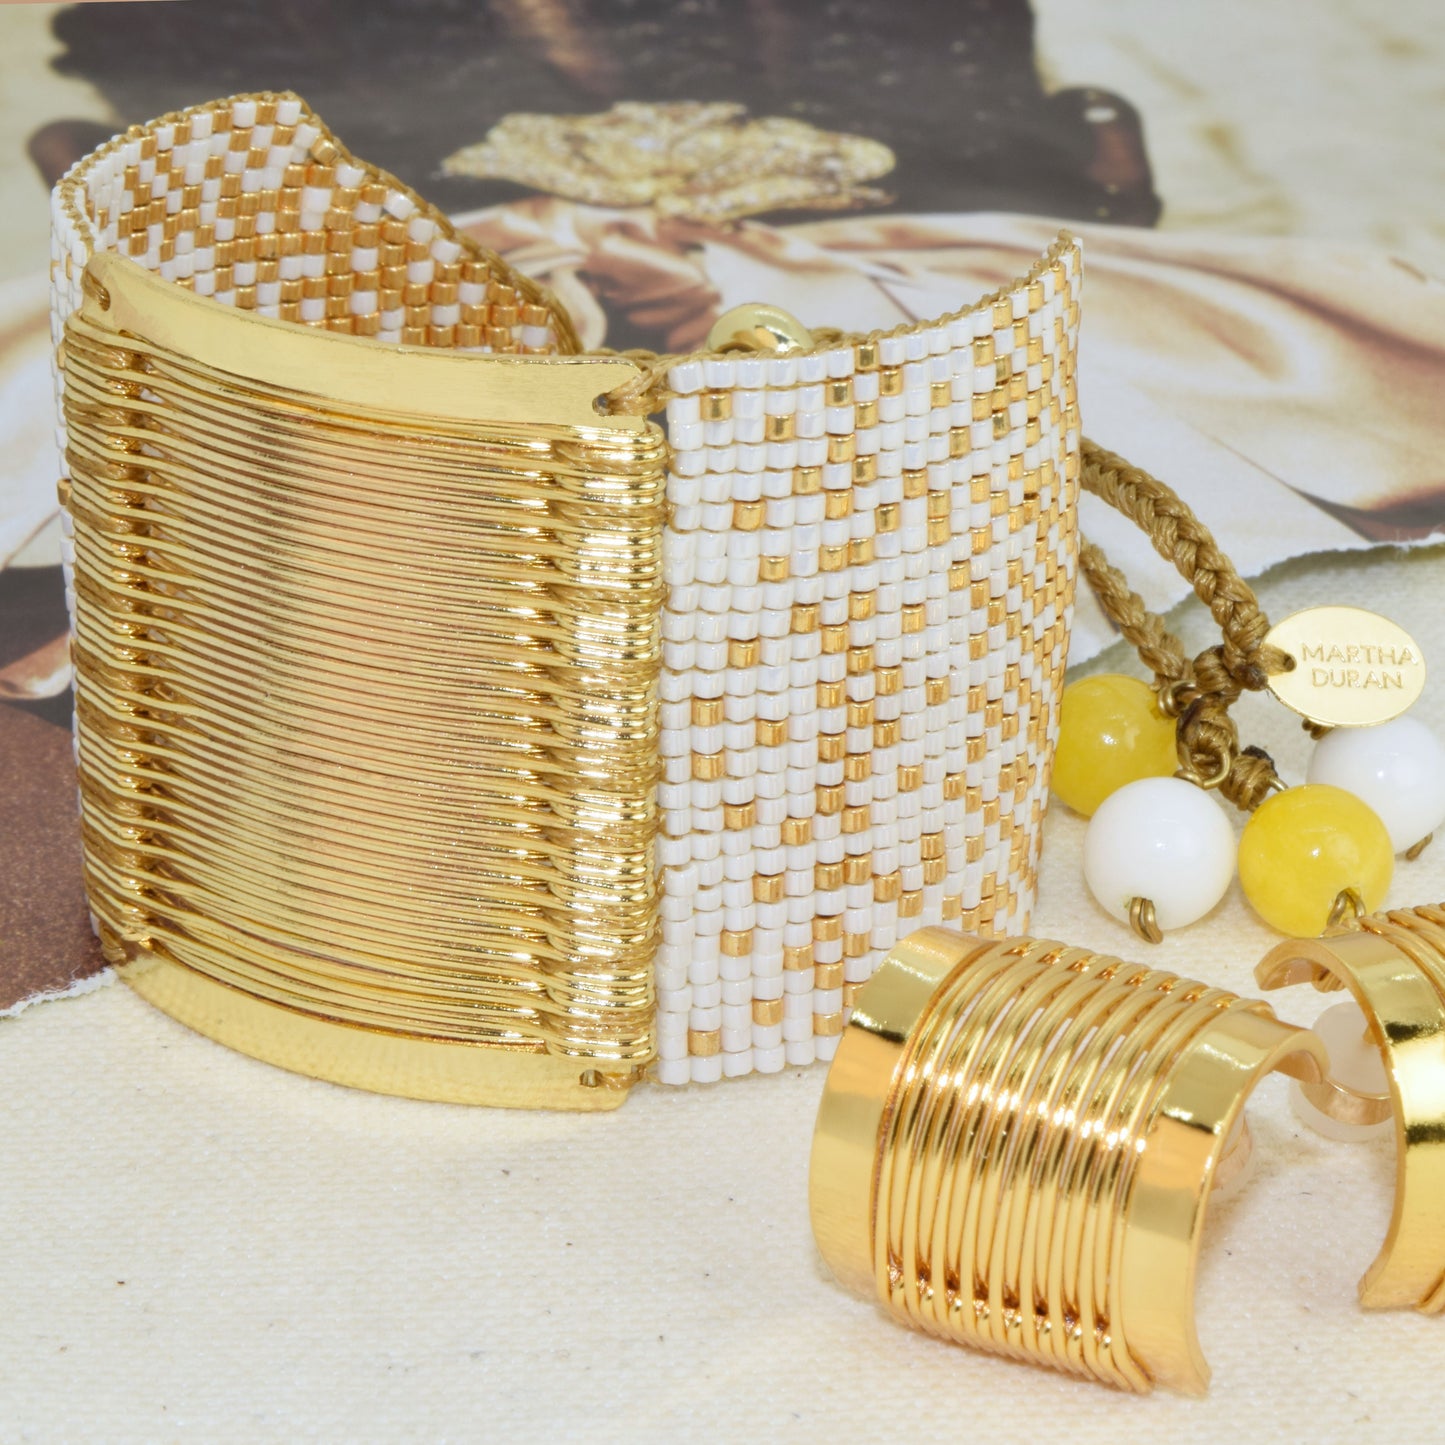 ABACO BRACELET IN WHITE PEARL AND GOLD